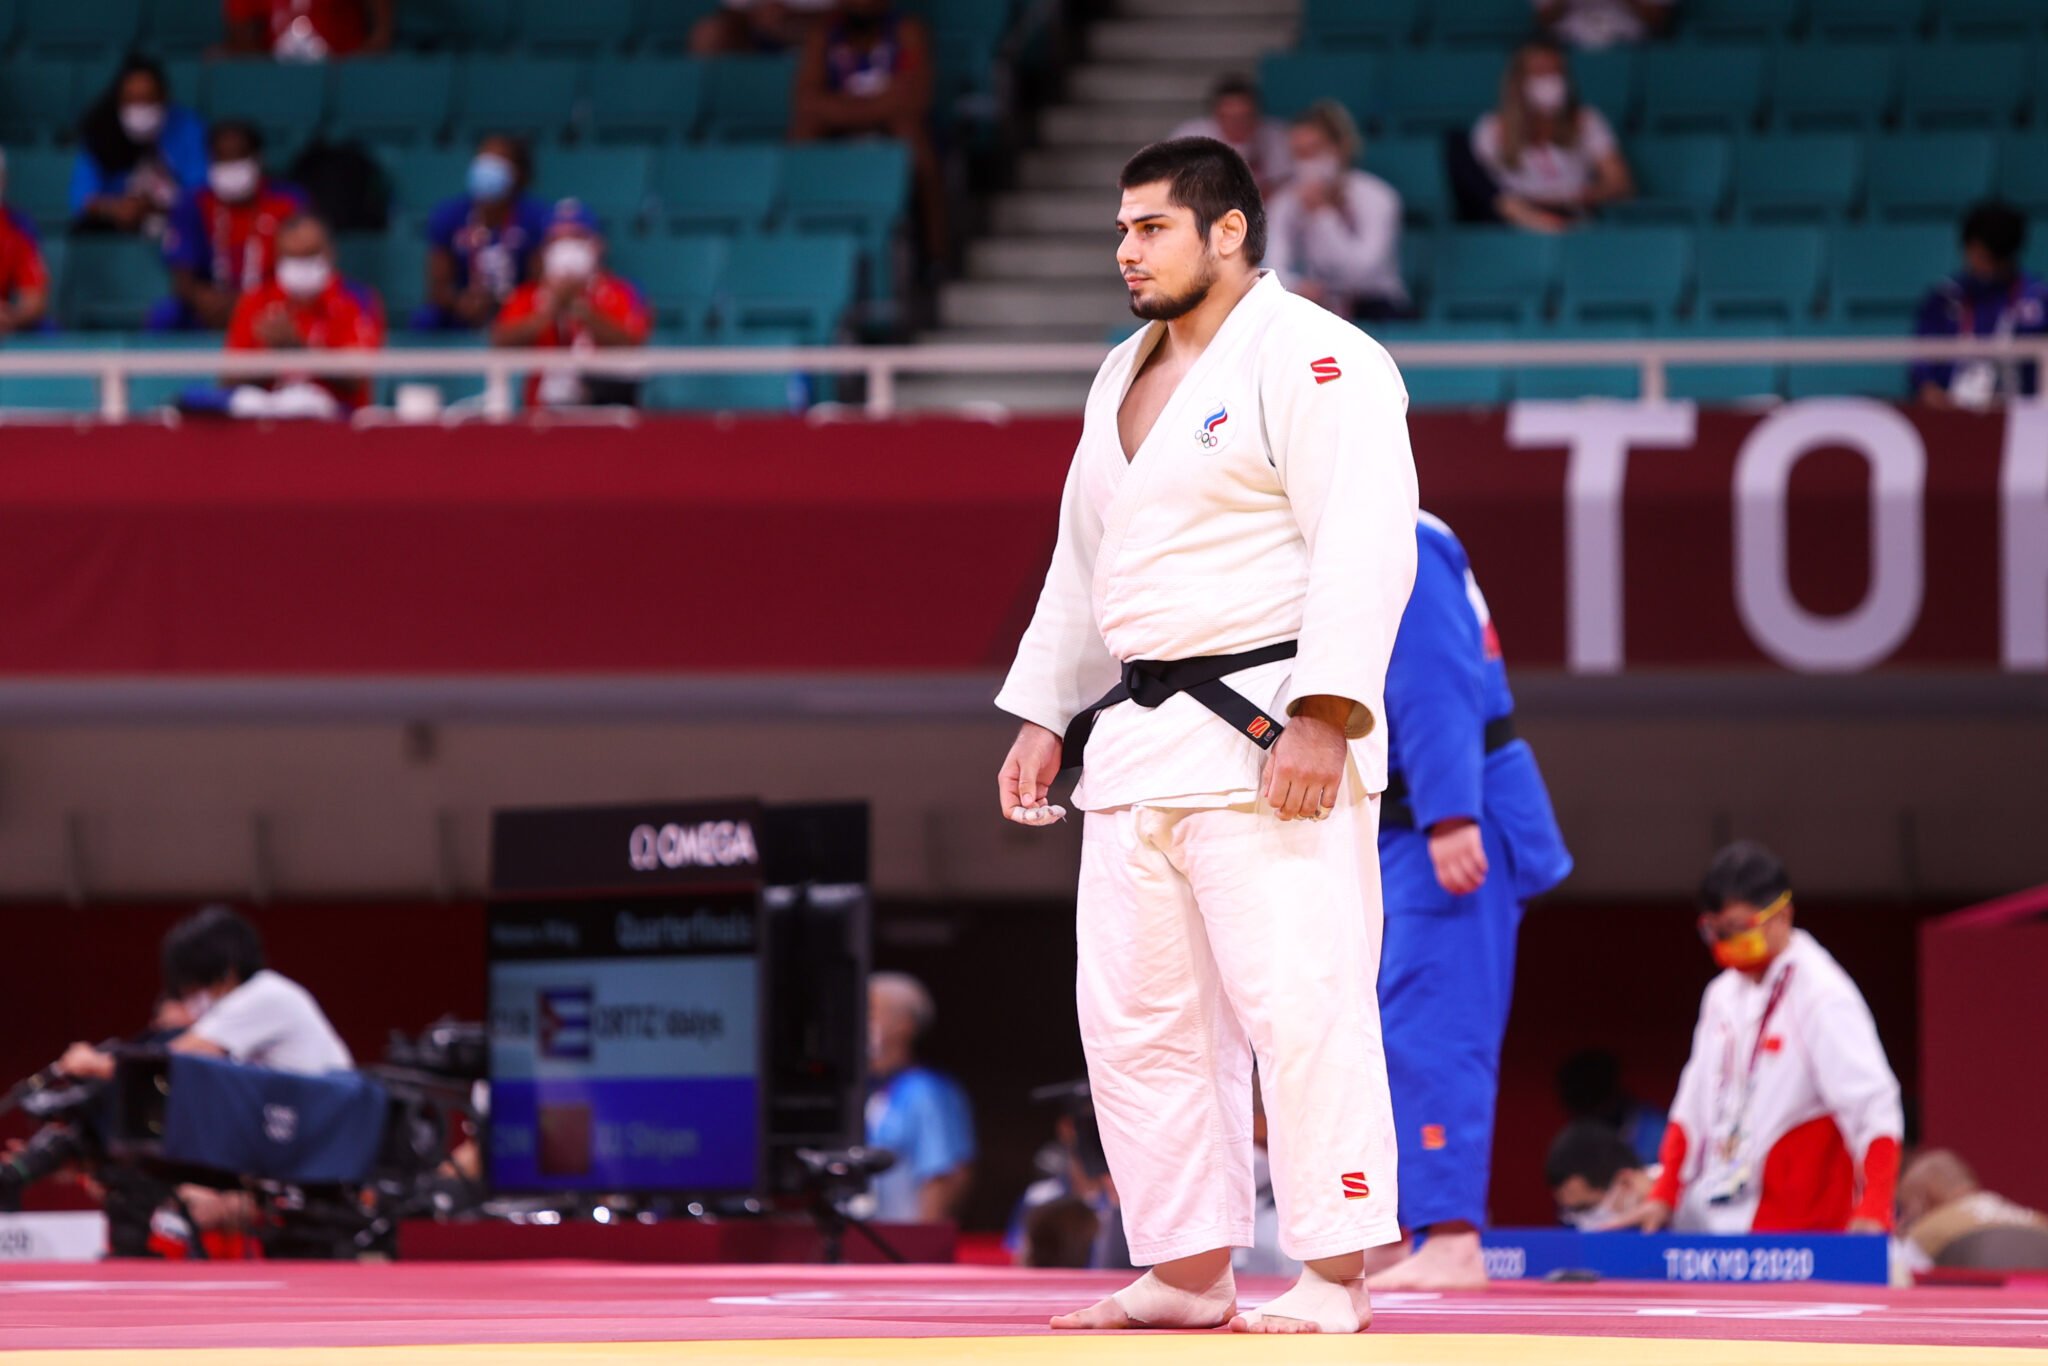 EUROPE TO TACKLE JAPAN AND CUBA FOR OLYMPIC TITLES ON FINAL DAY - European  Judo Union